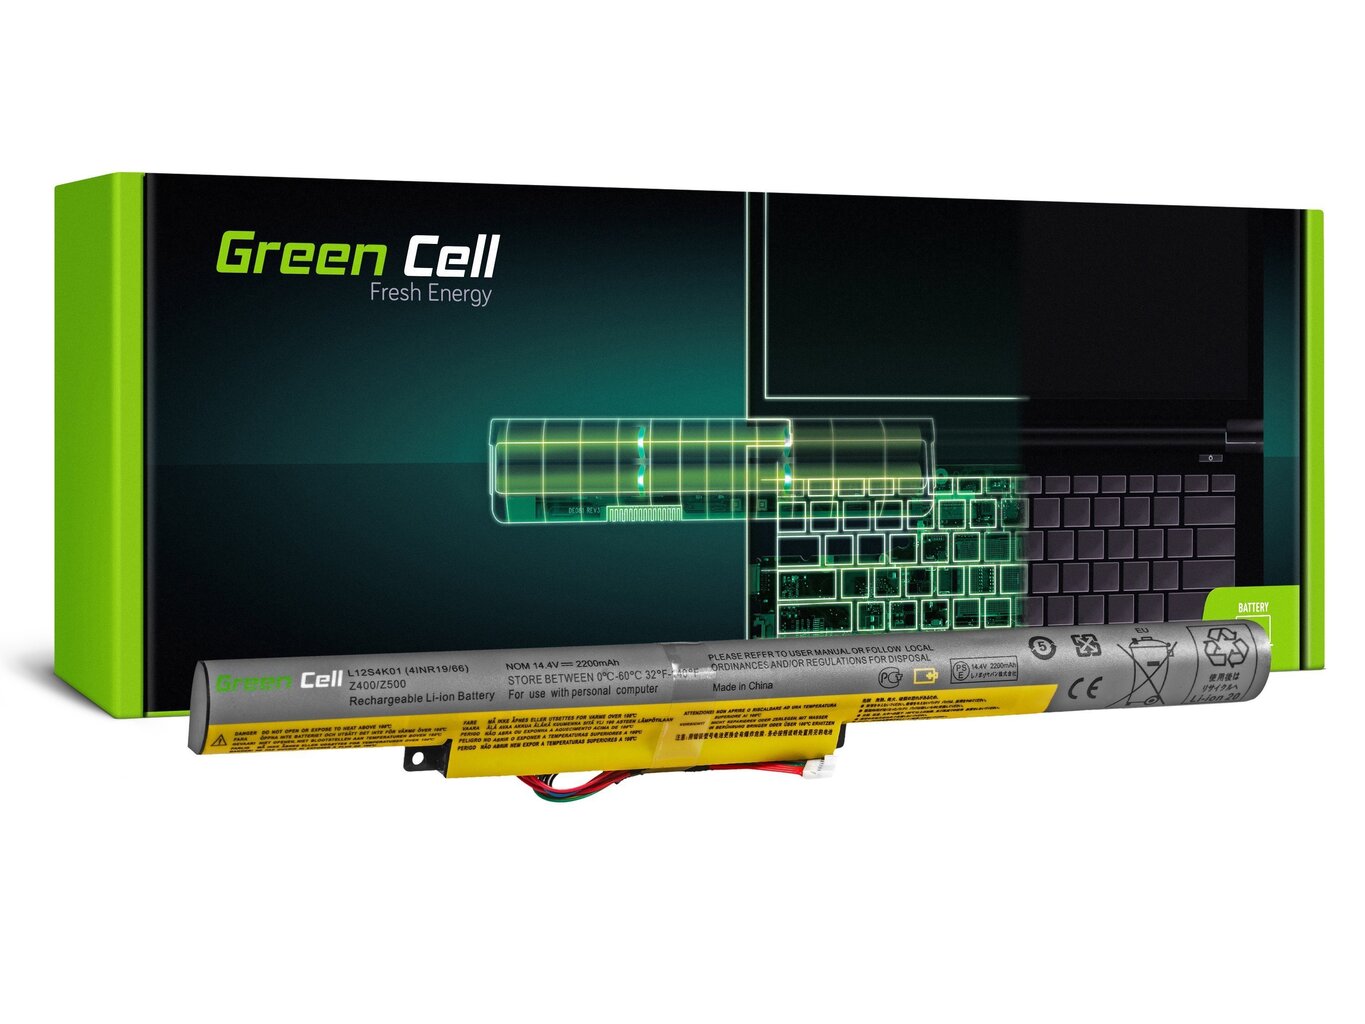 Sülearvuti aku Green Cell Laptop Battery for IBM Lenovo IdeaPad P500 Z510 P400 TOUCH P500 TOUCH Z400 TOUCH Z510 TOUCH цена и информация | Sülearvuti akud | hansapost.ee